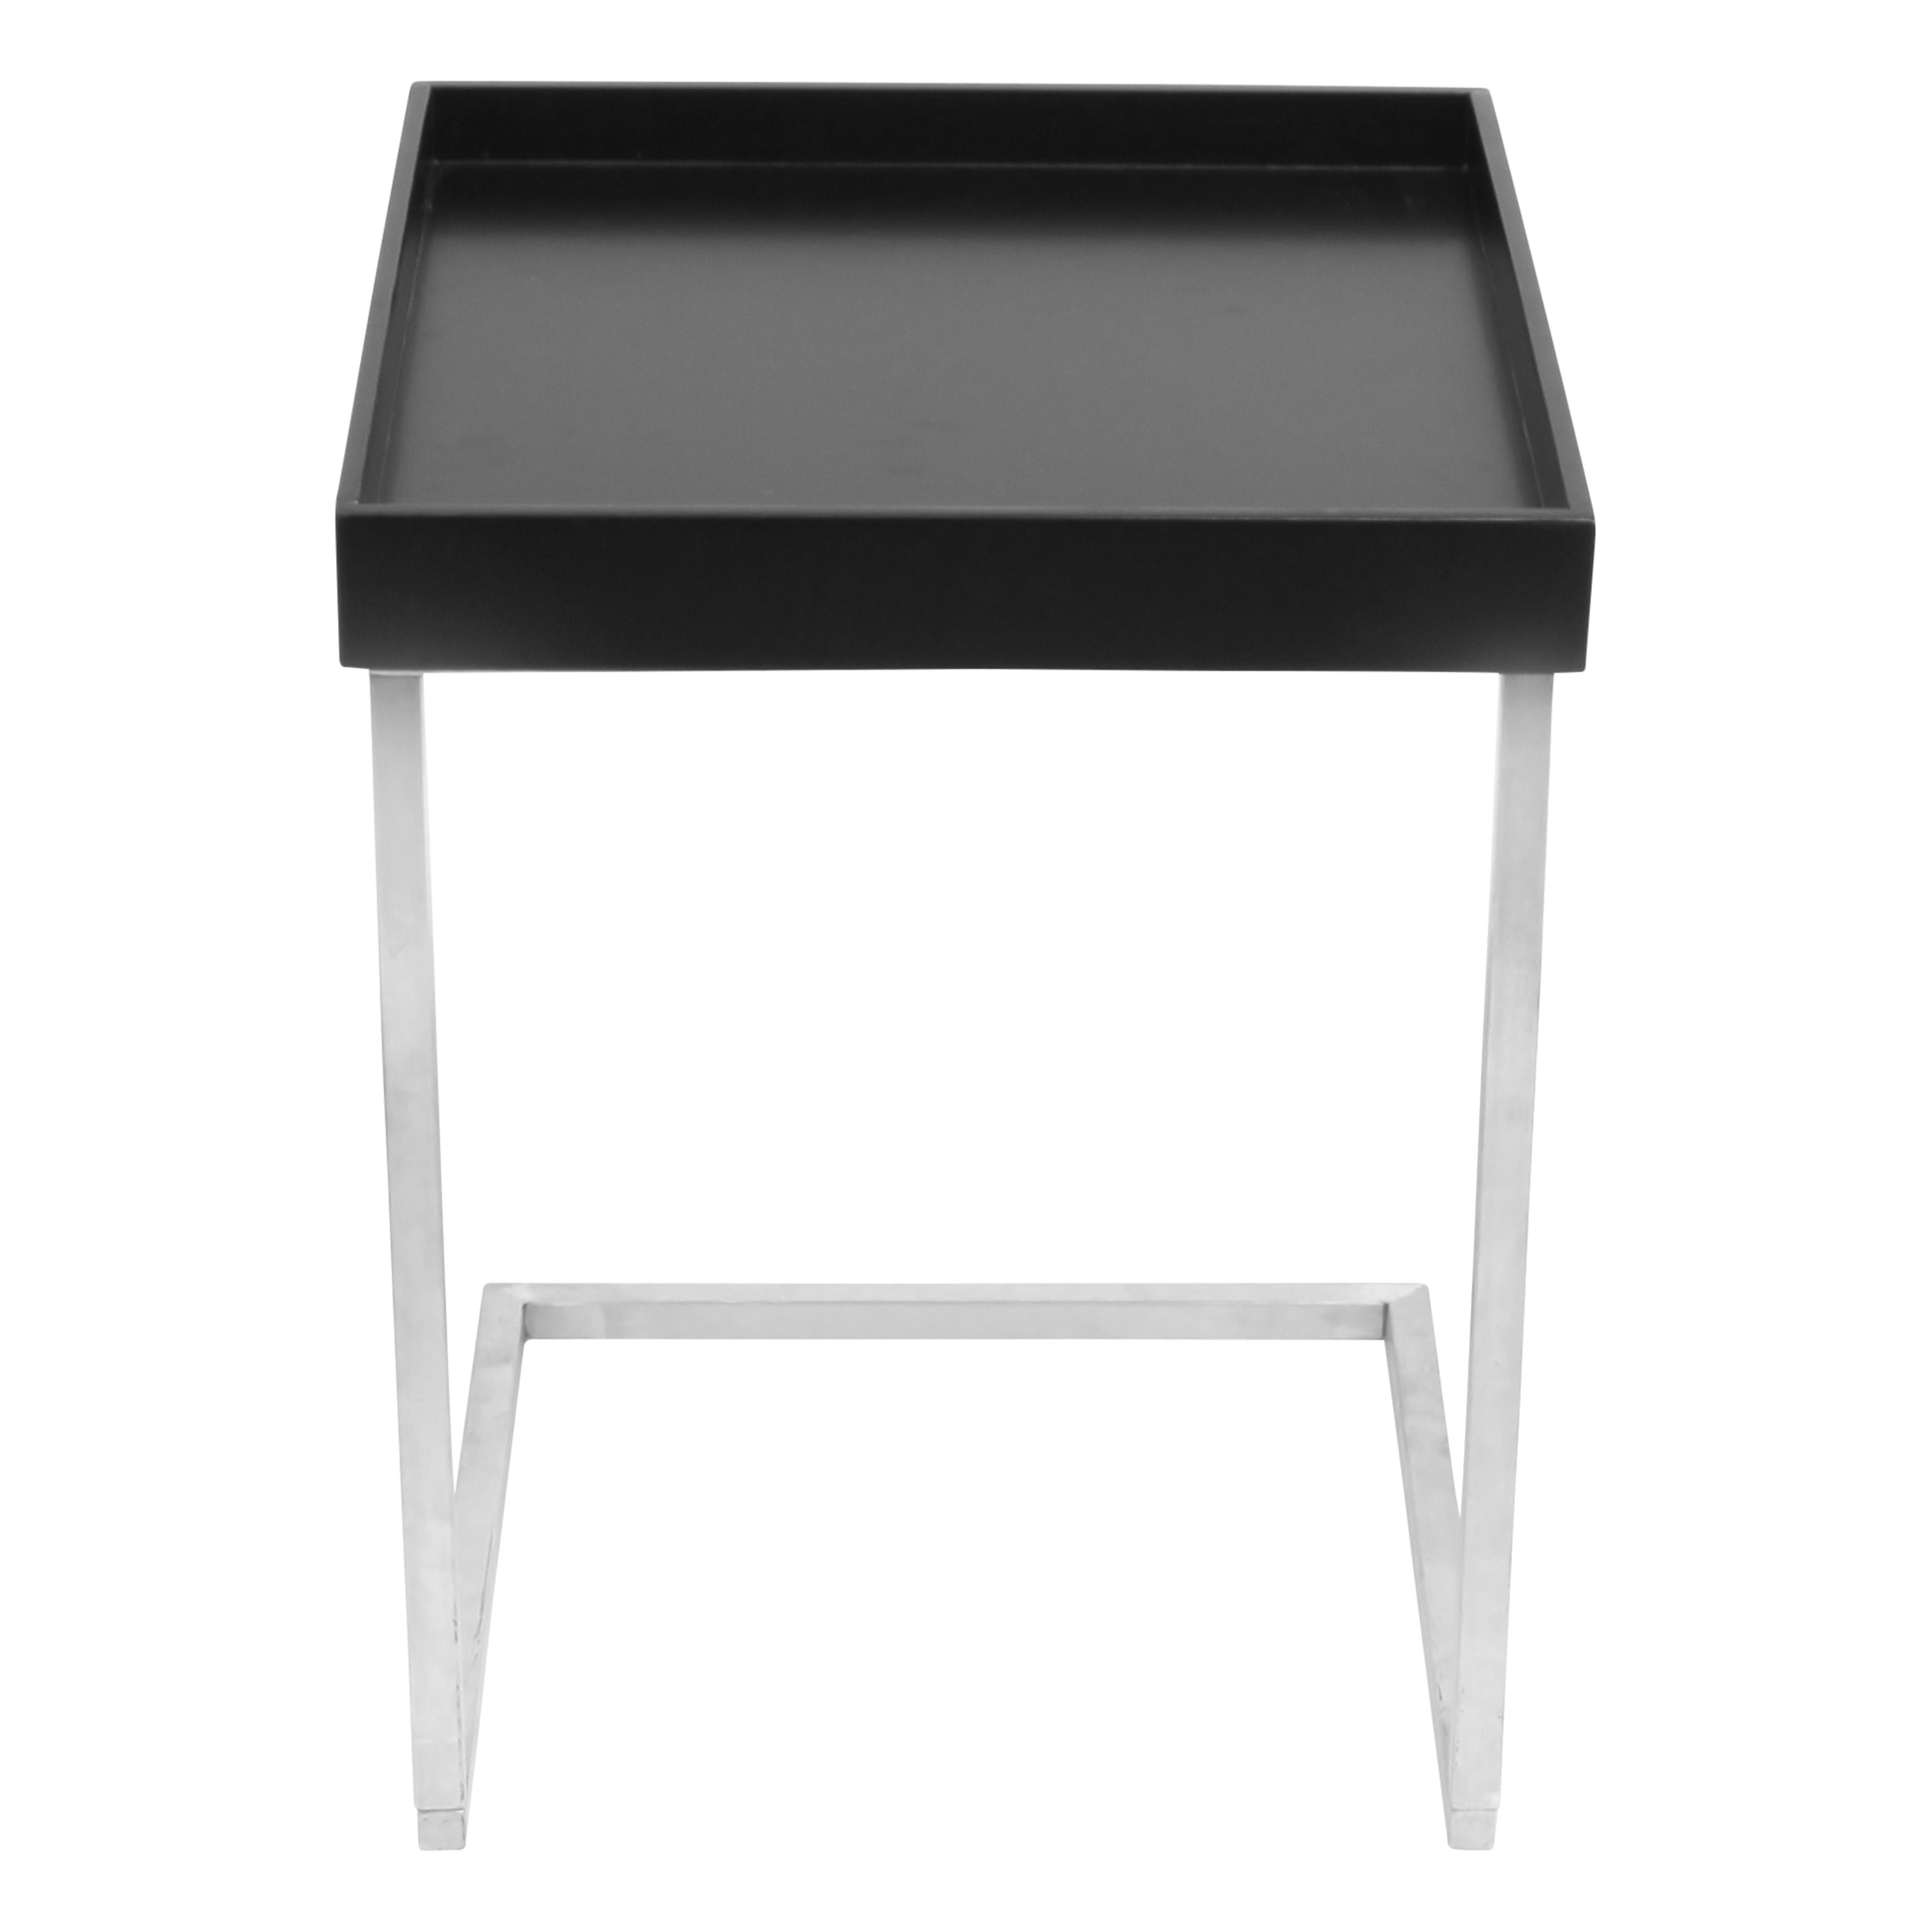 Zenn Contemporary Black and Stainless Steel Tray Table - Free ...